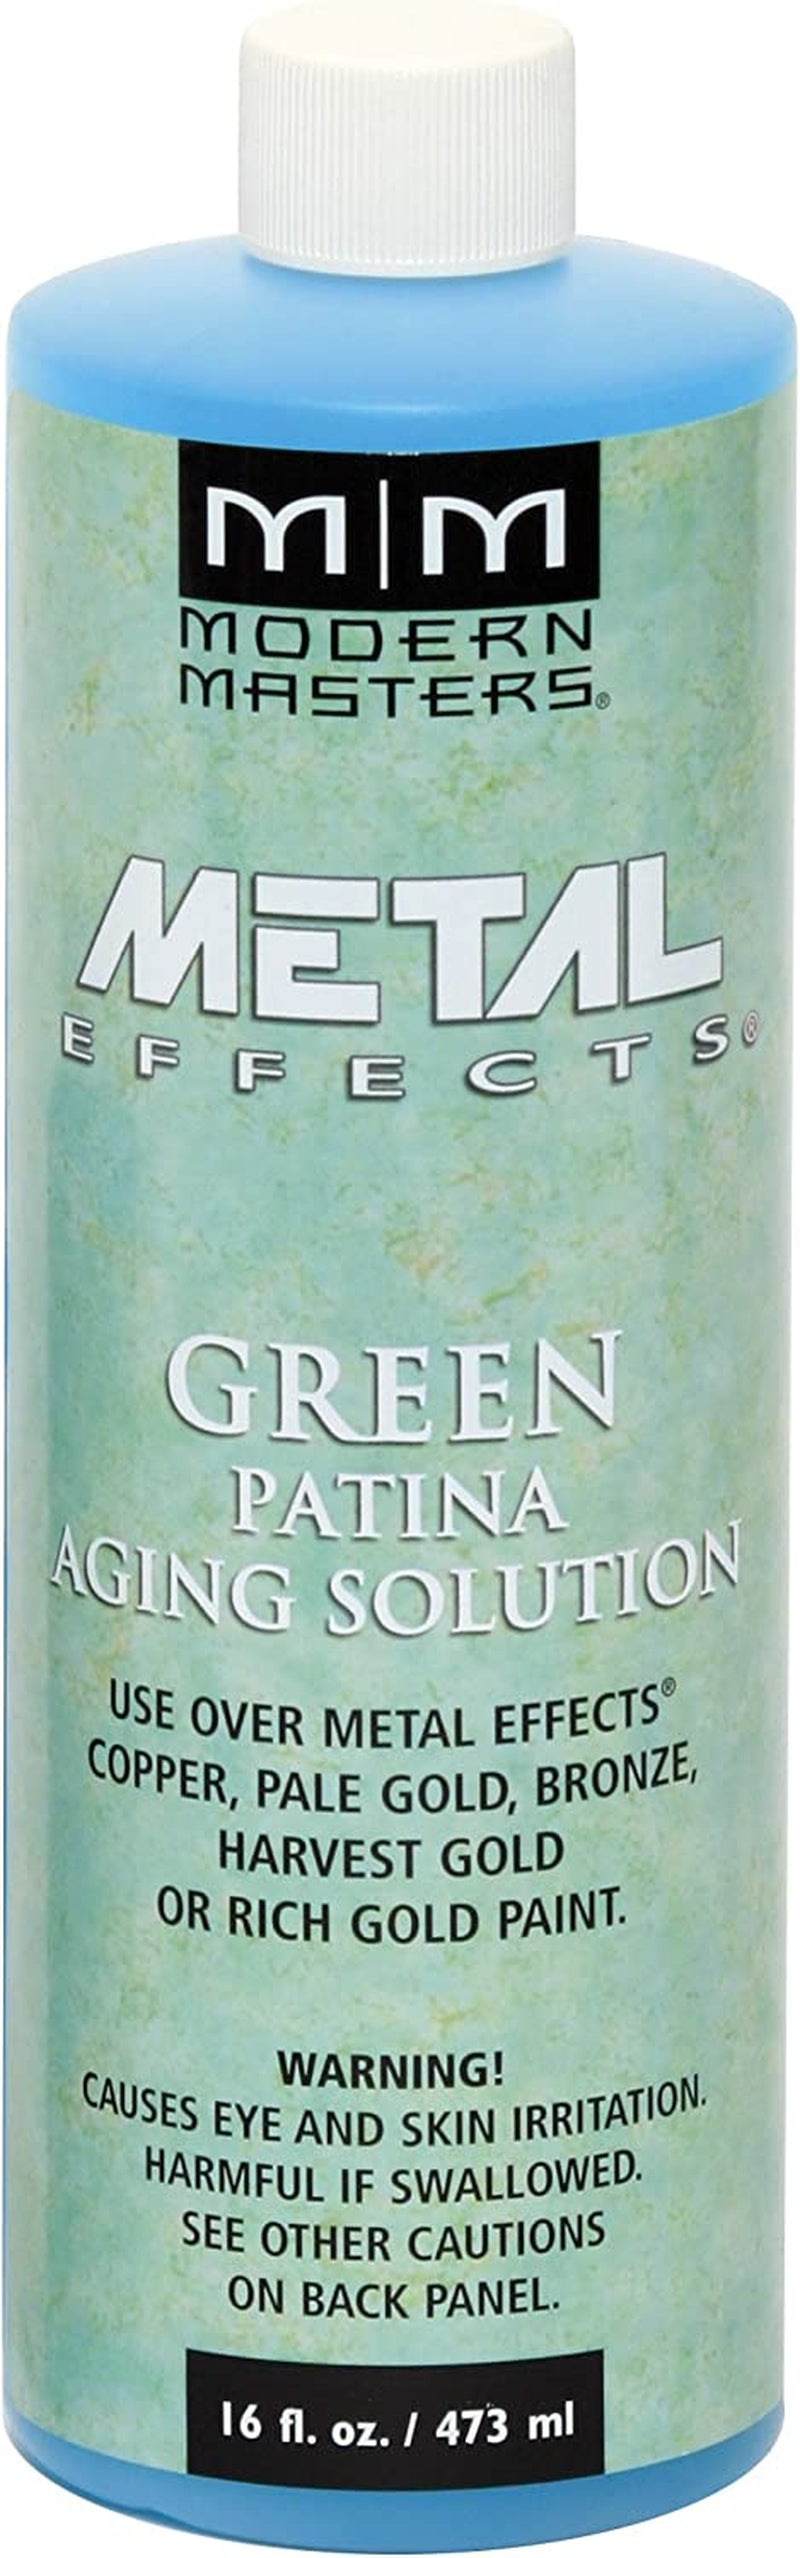 Modern Masters, 1 Pt Modern Masters PA901 Green Metal Effects Aging Solution